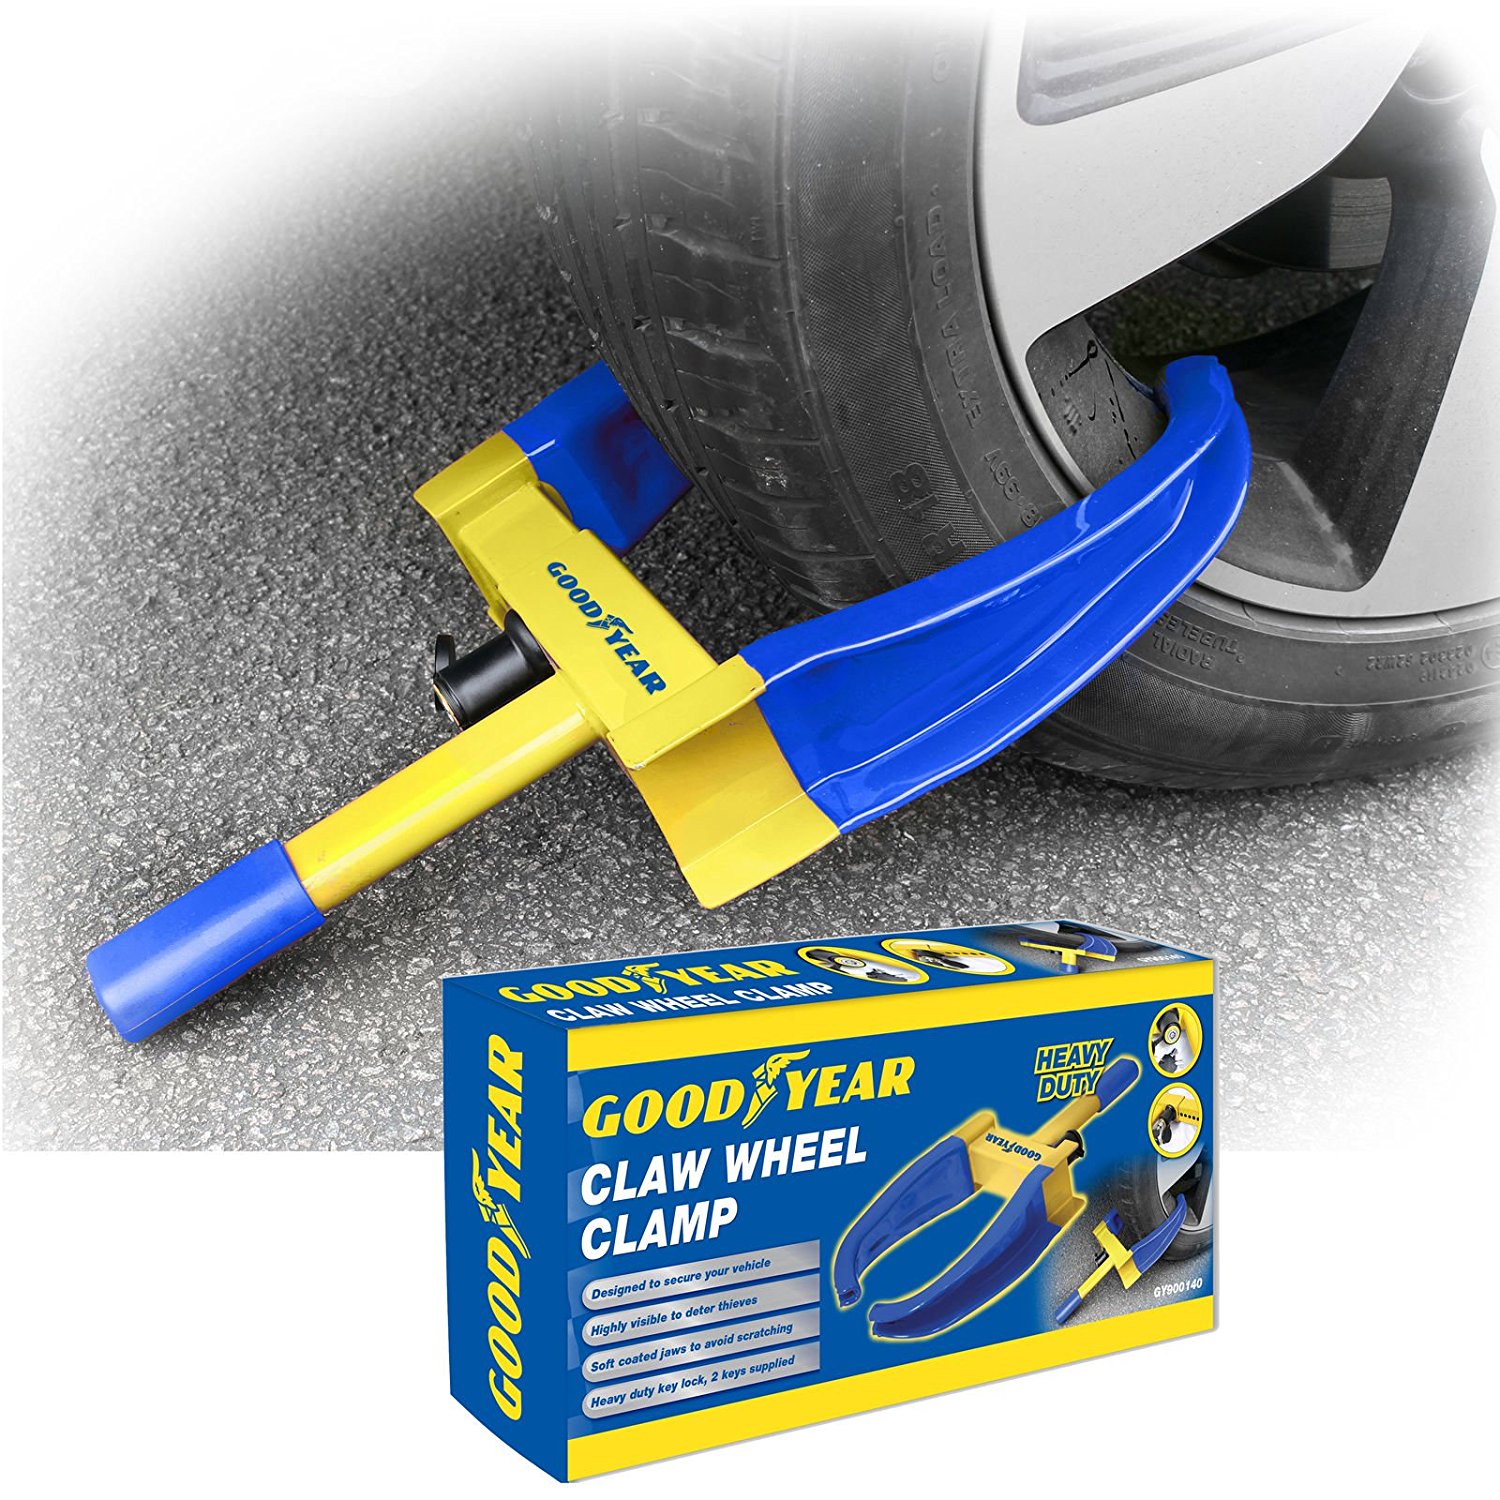 Review of Busyall Wheel Clamp Lock